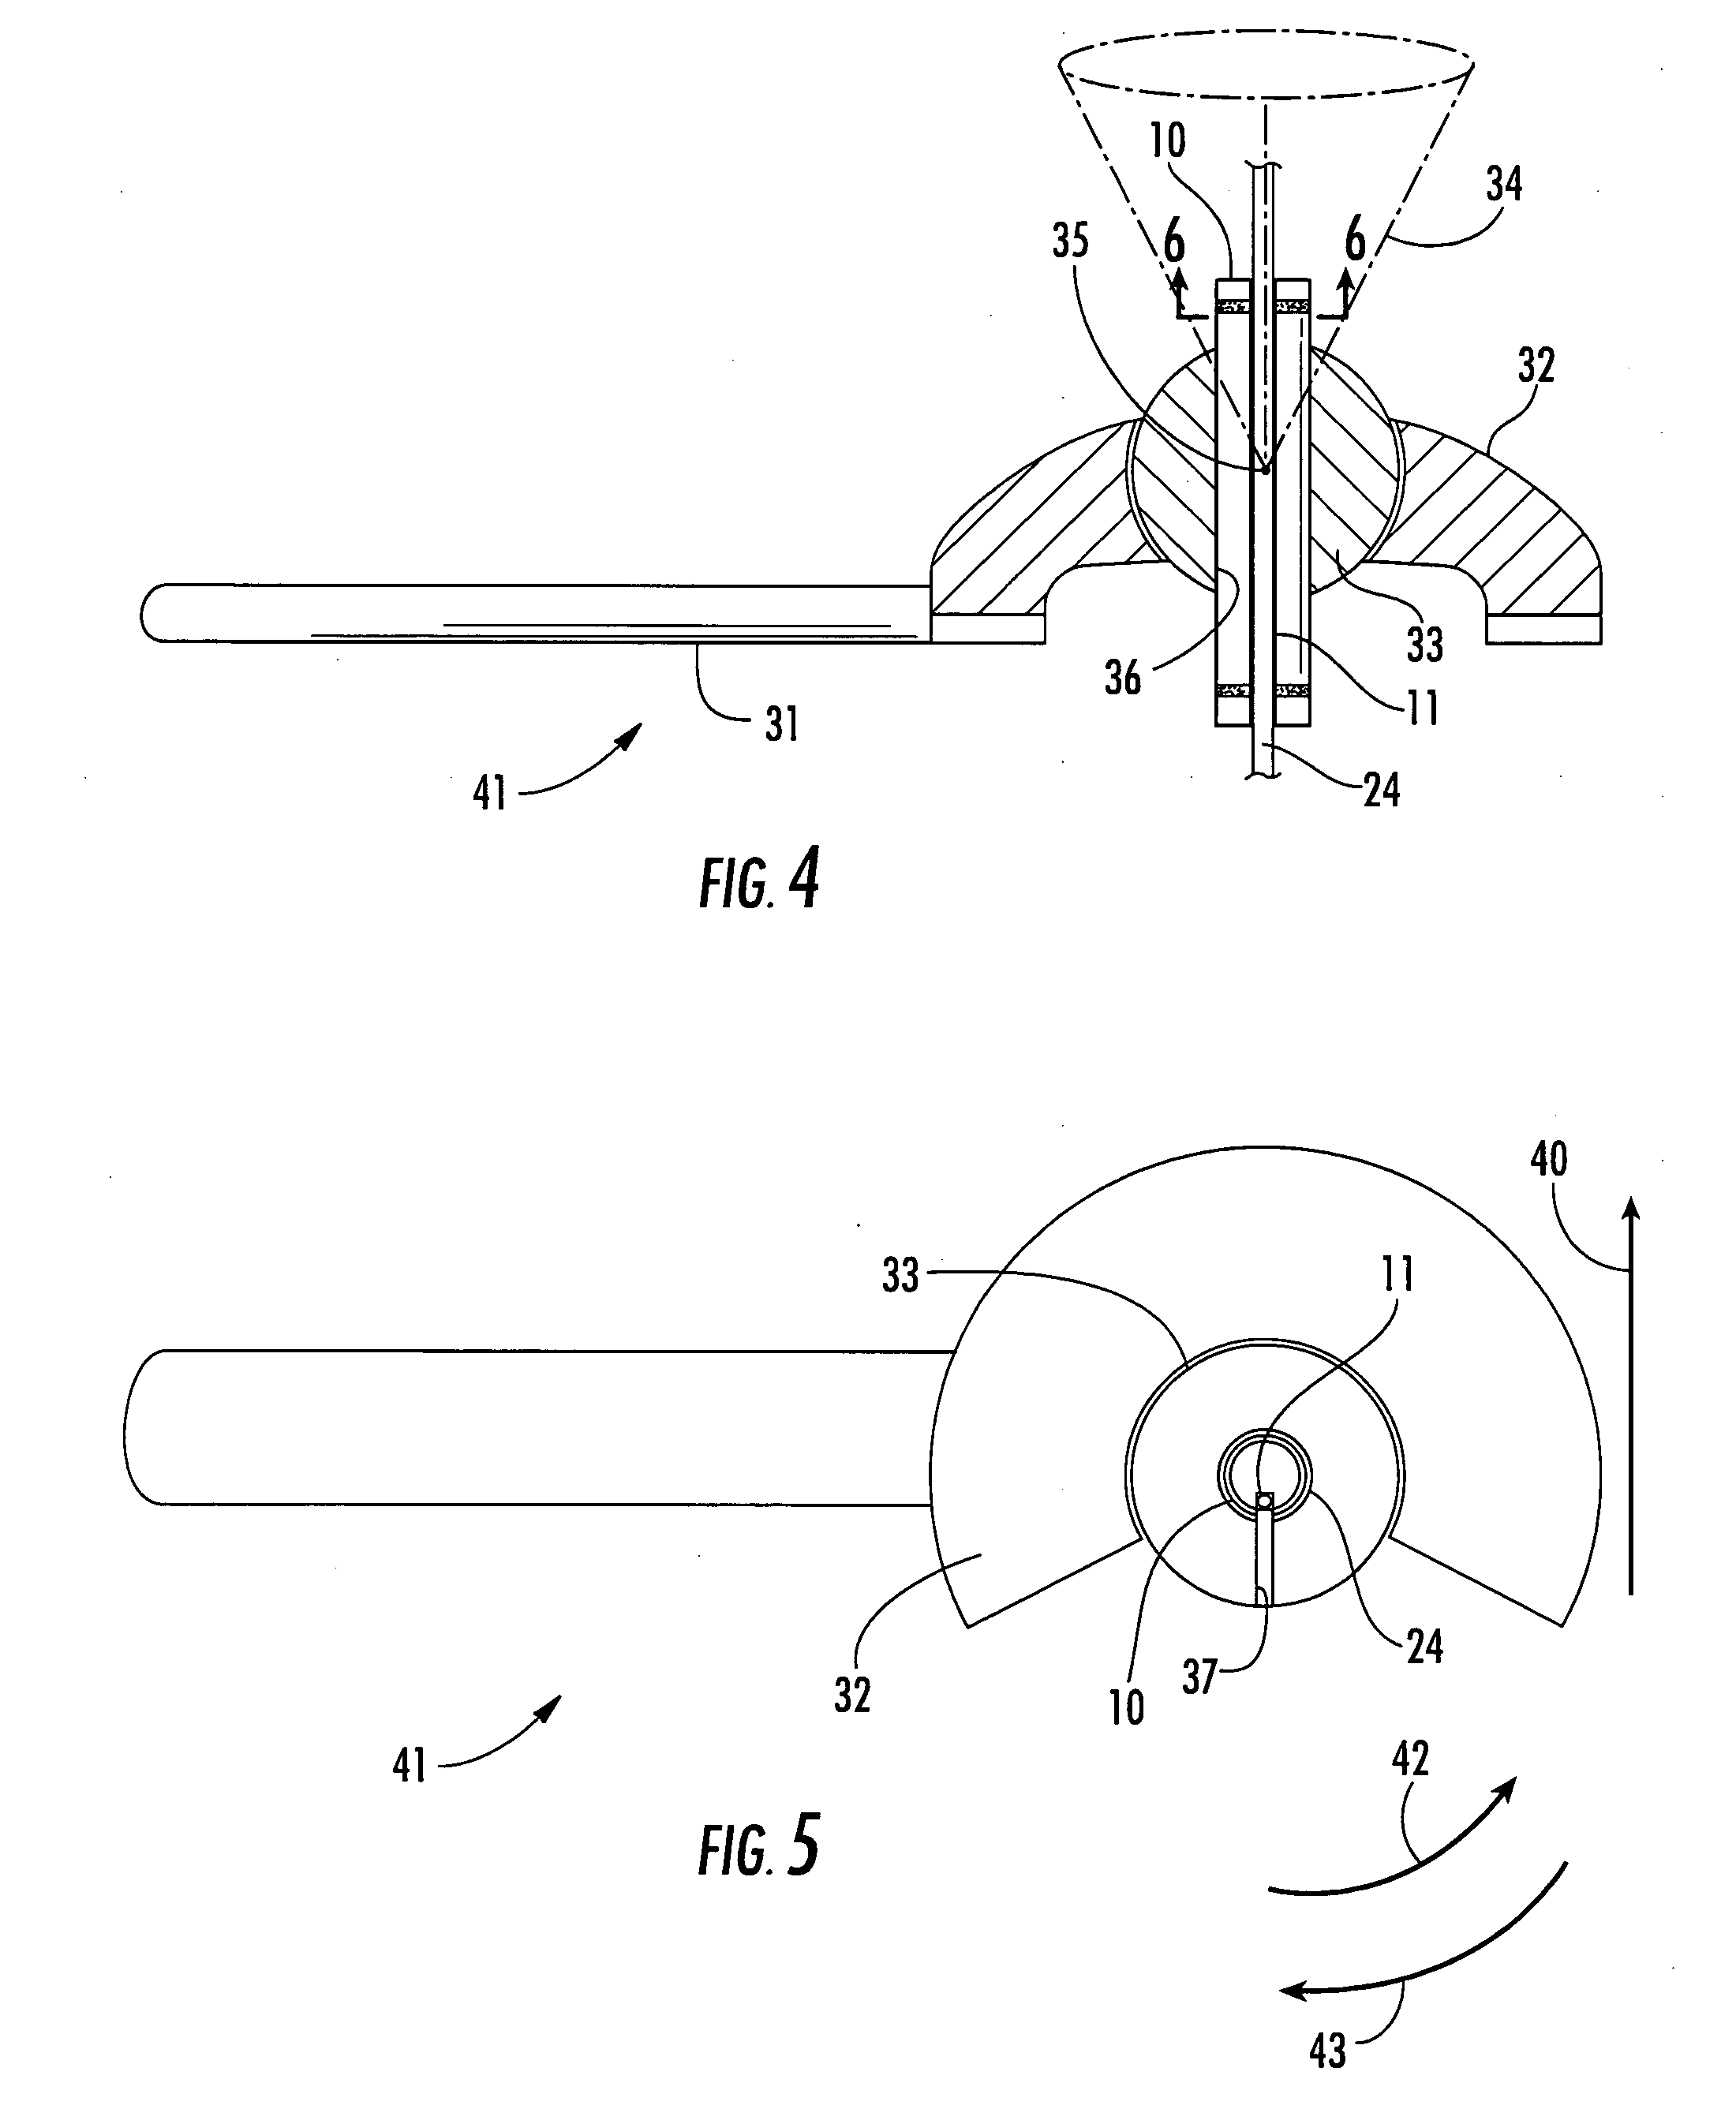 Needle guidance apparatus and method